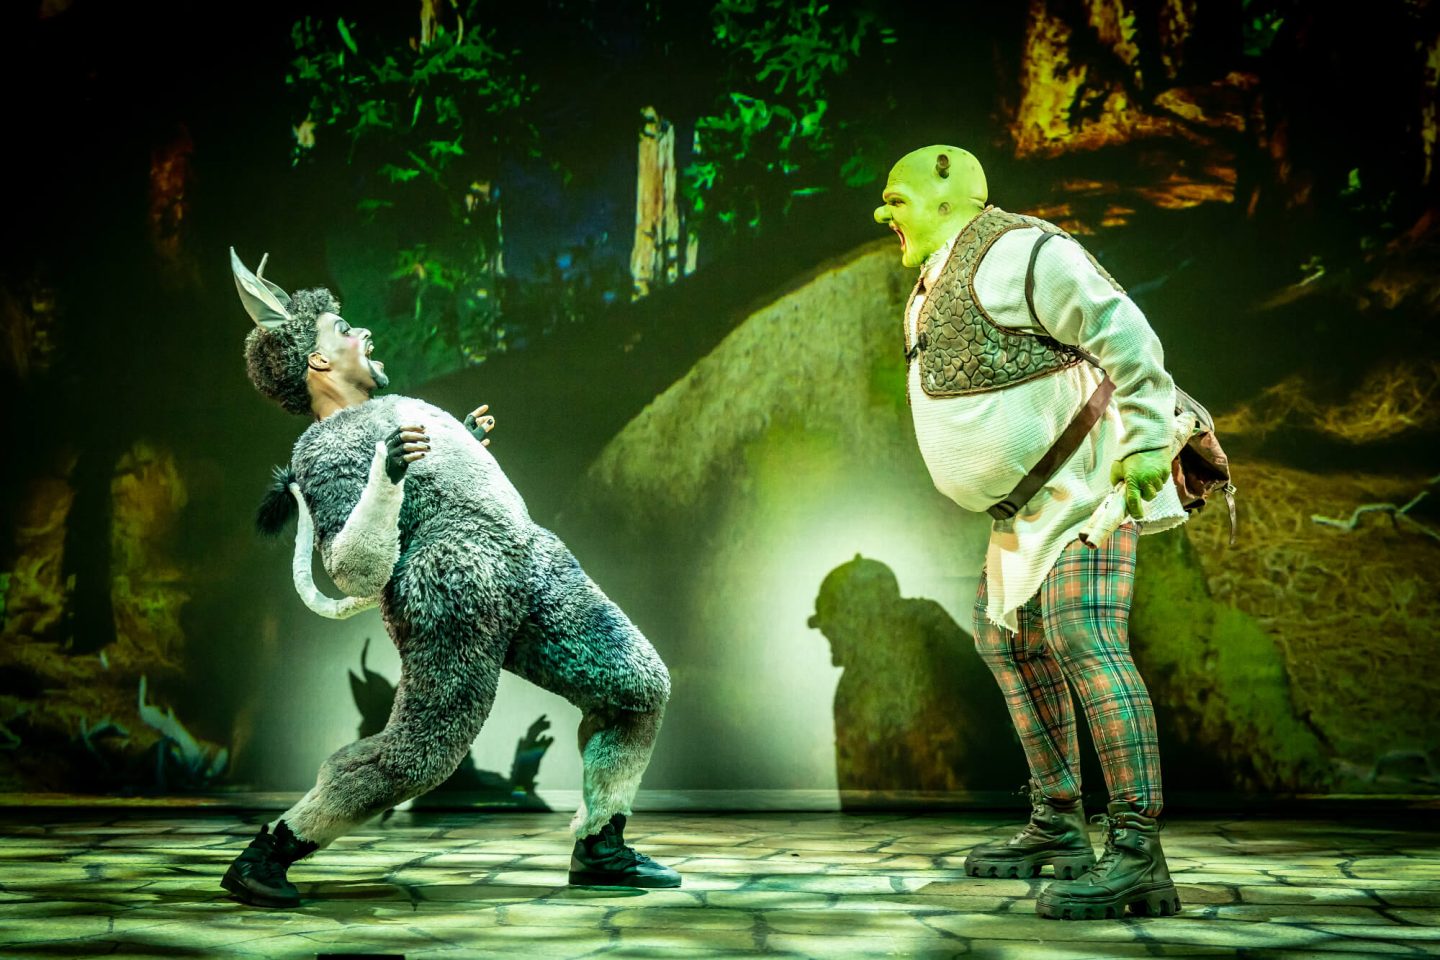 Shrek and Donkey on stage in Shrek the Musical at the Alexandra Theatre Birmingham